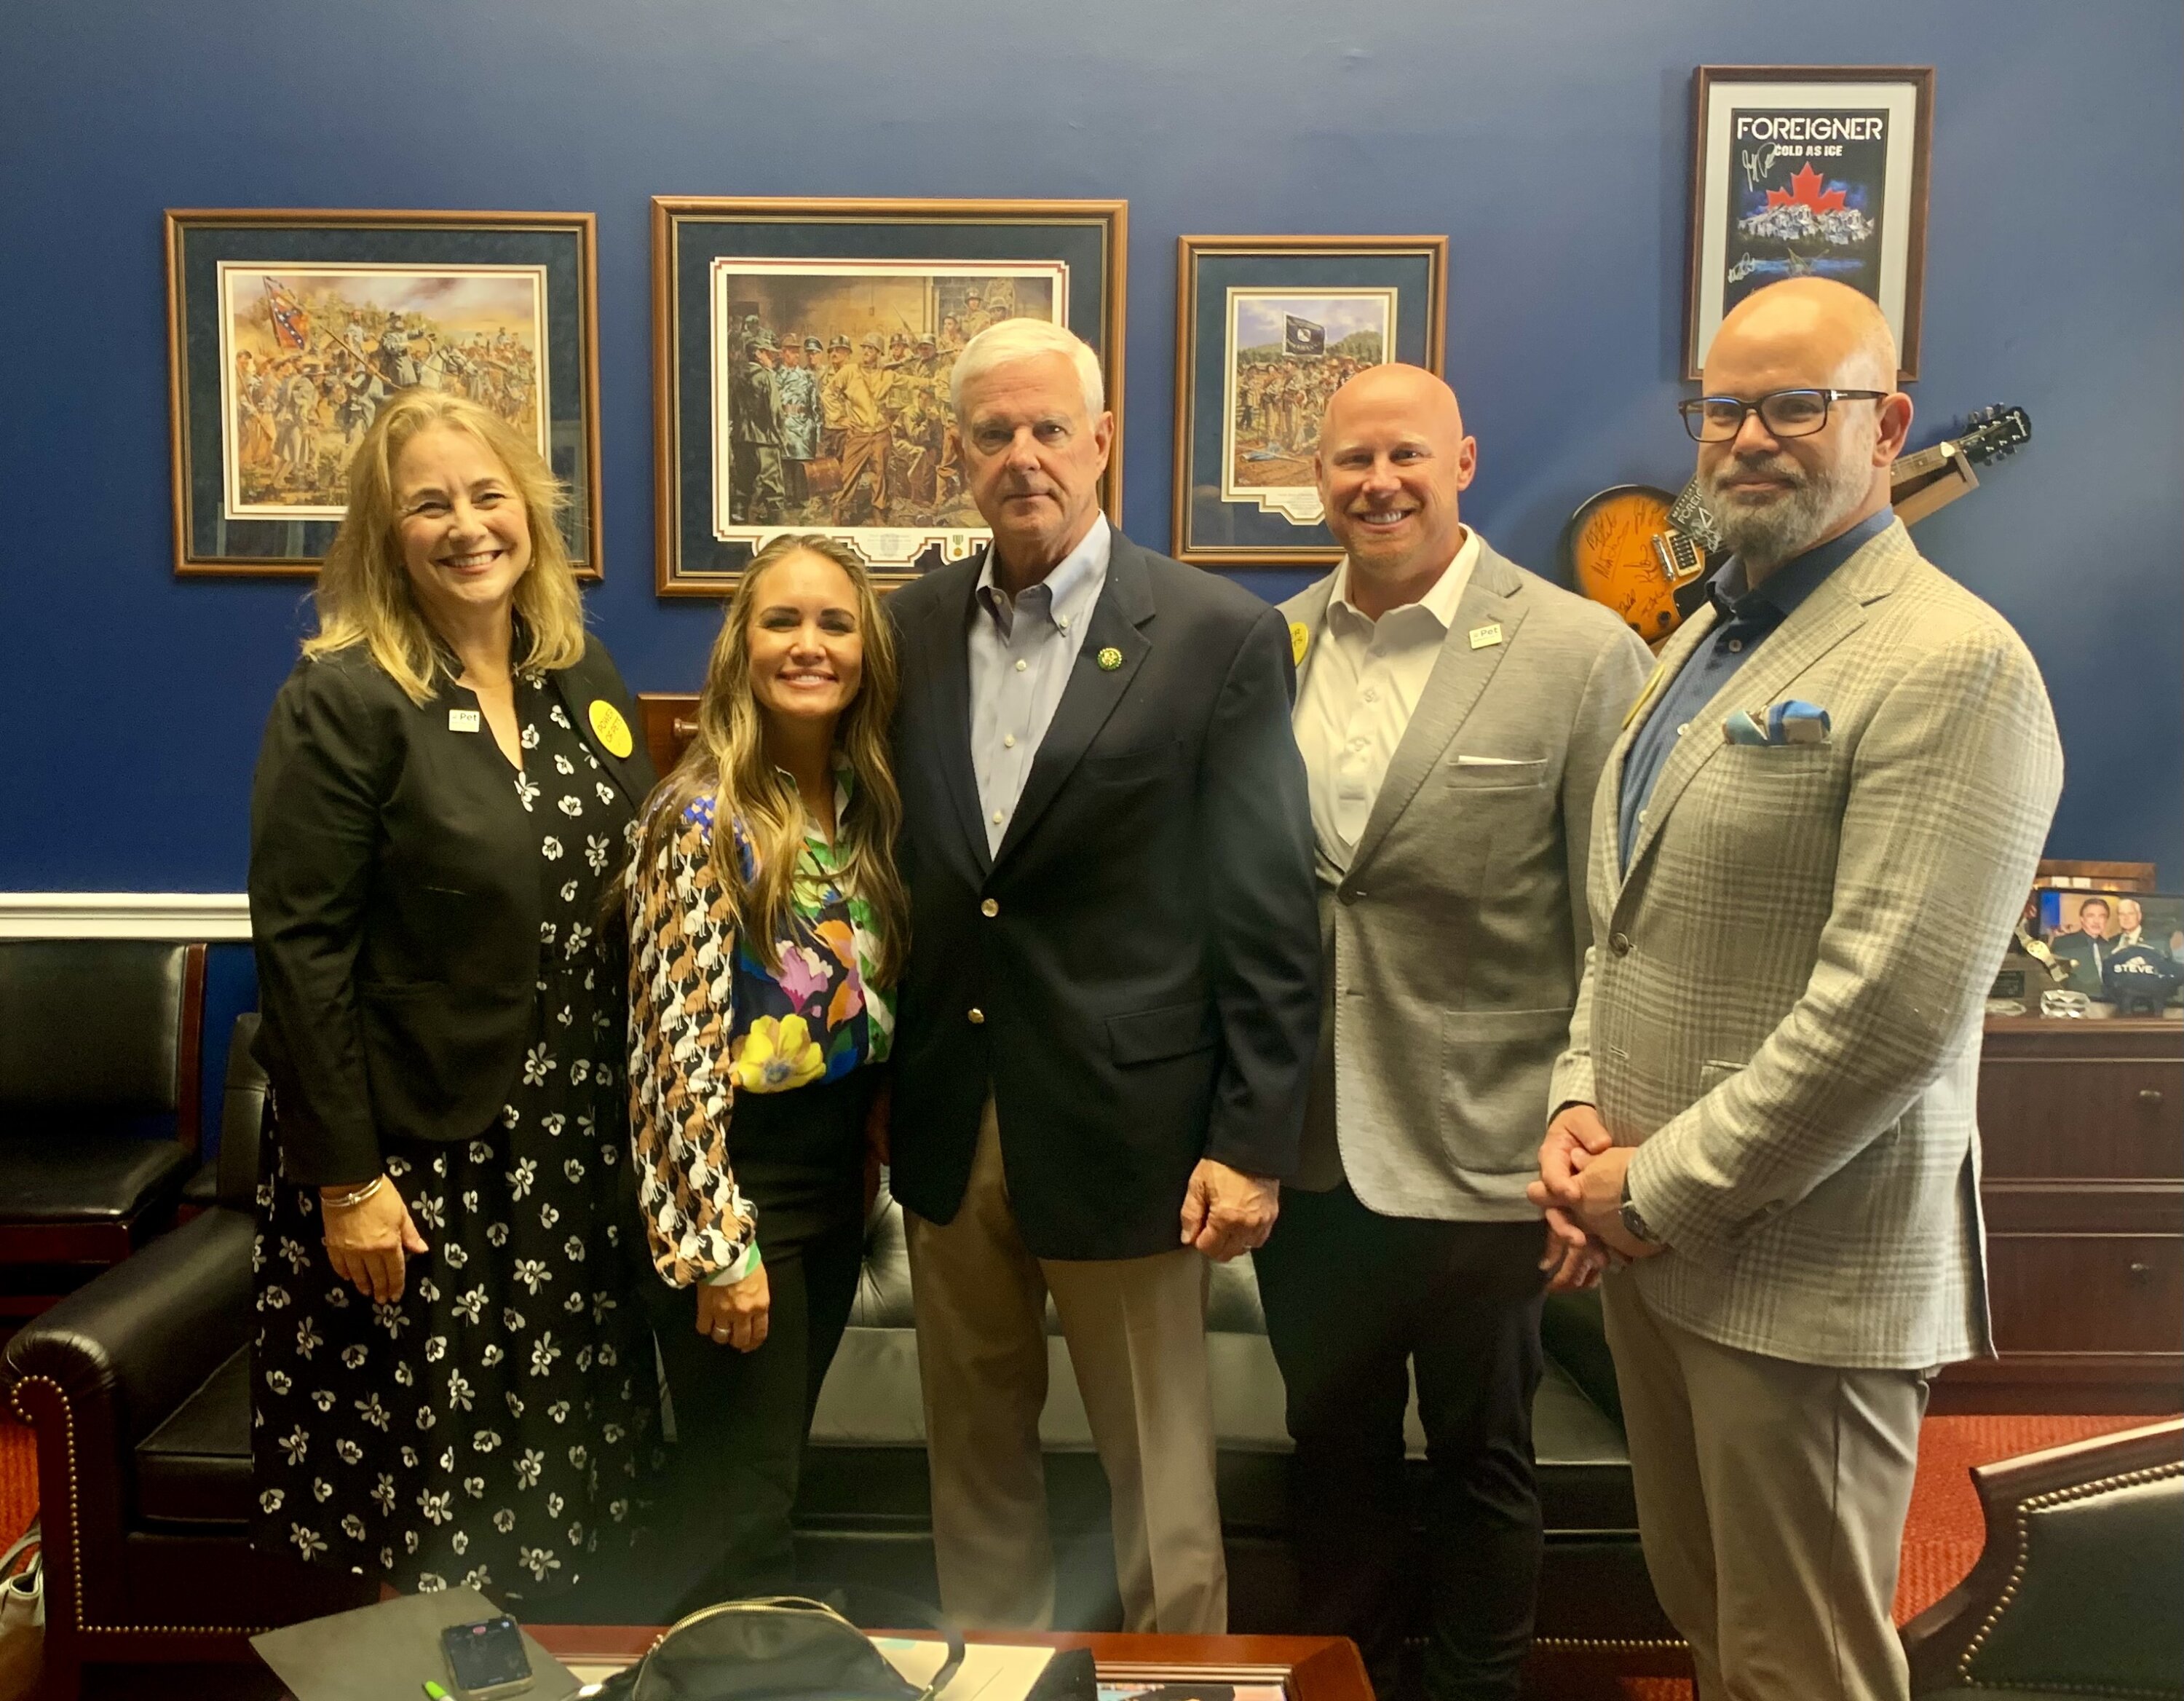 Participants in Pet Advocacy Network's 6th Annual Pet Care Community D.C. Fly-In met with Congressman Steve Womack (R-AR) of Arkansas as part of over 100 meetings on Capitol Hill on September 20.